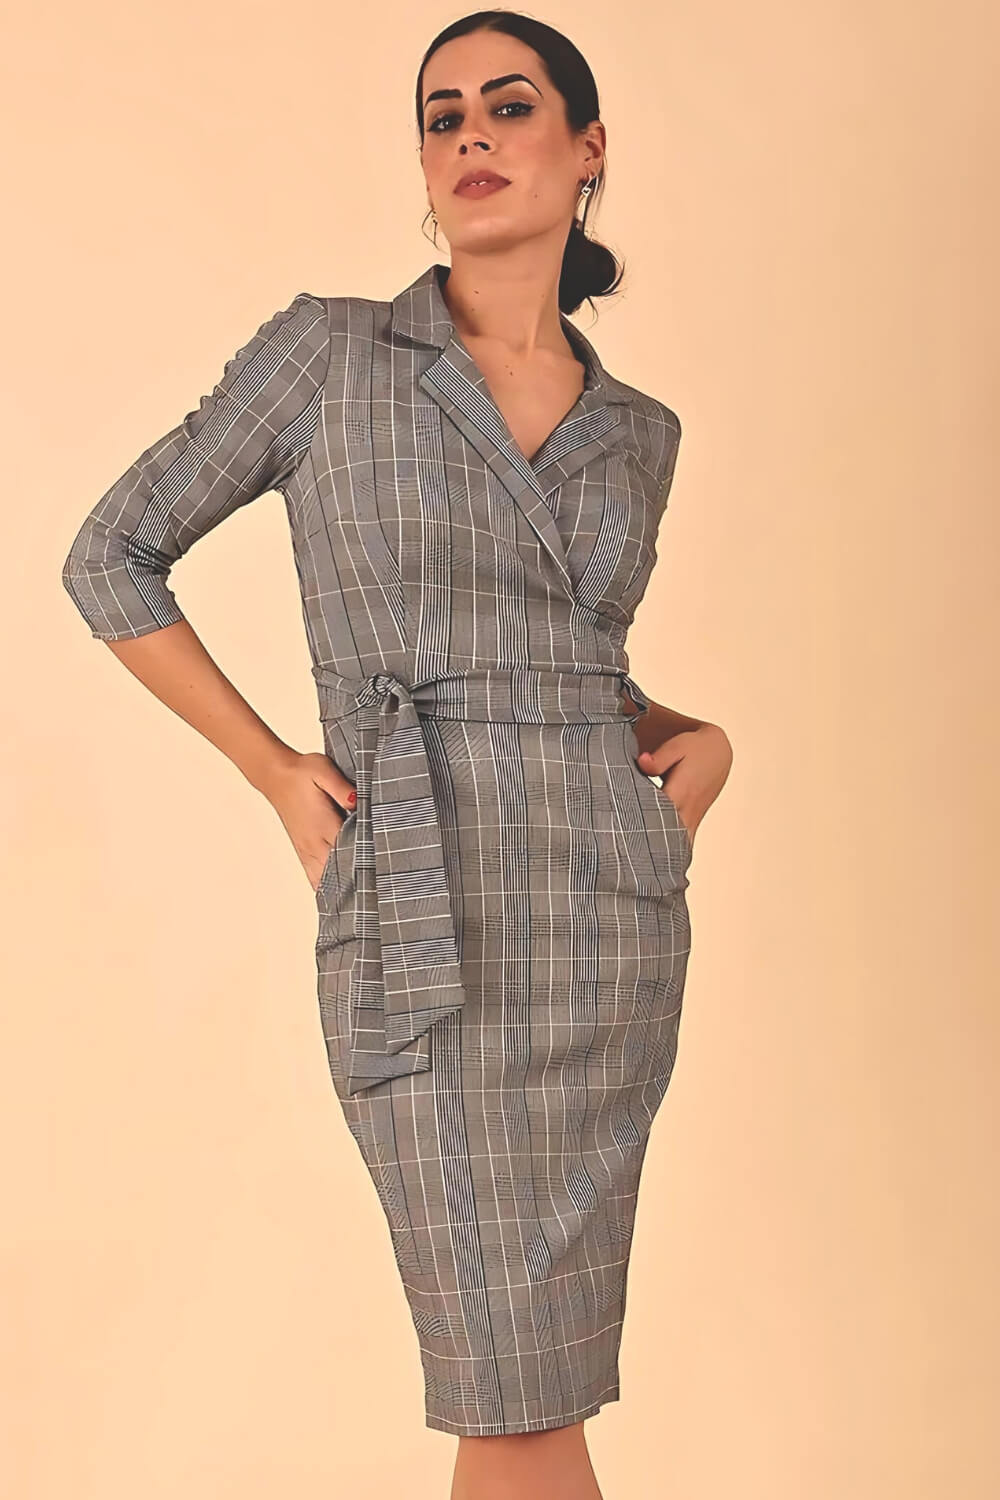 Model wearing the Diva Colette Check dress with collar detail and three quarter length sleeve in Prince of Wales check front image